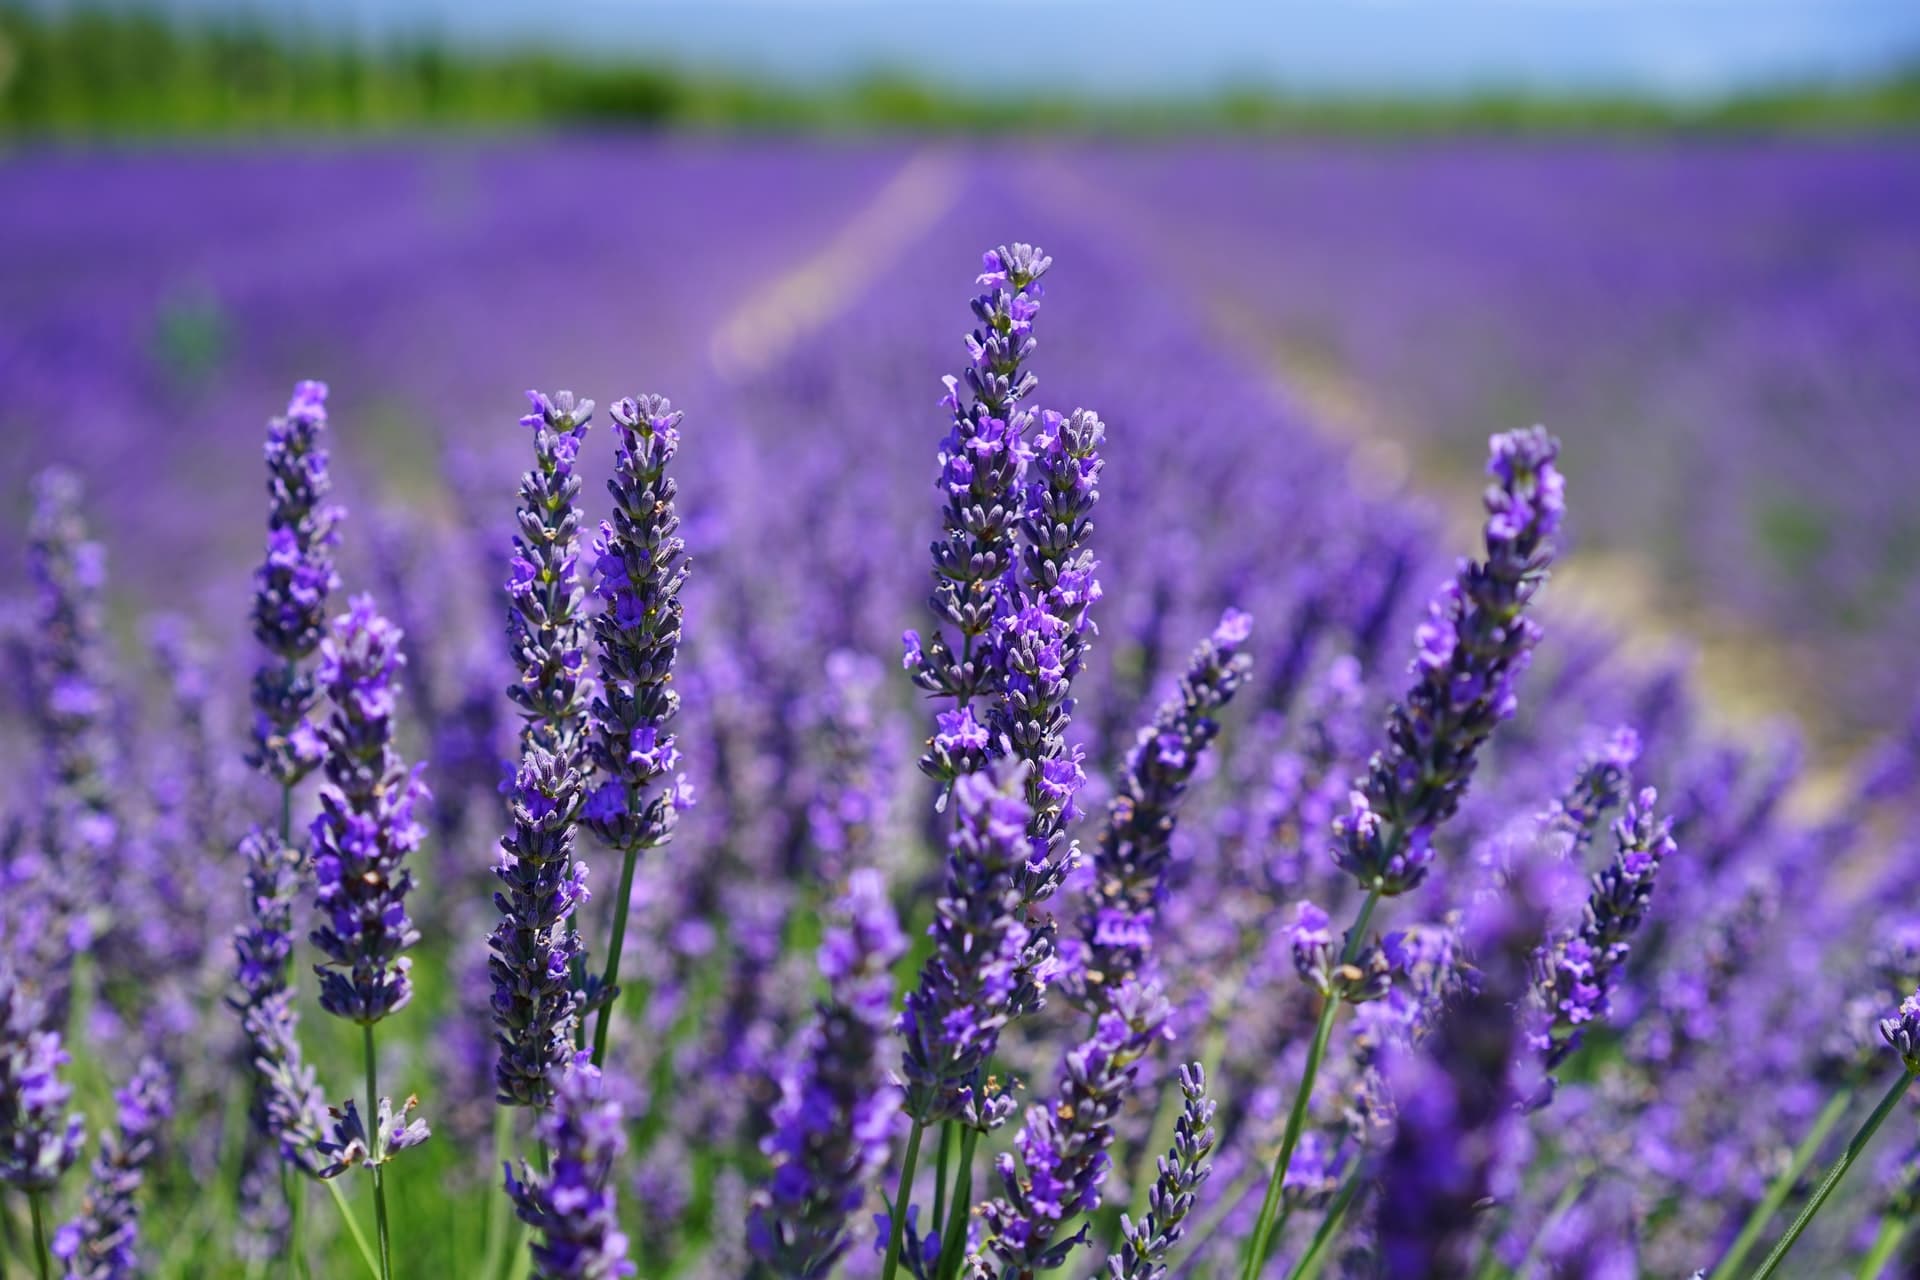 How to grow lavender from seed